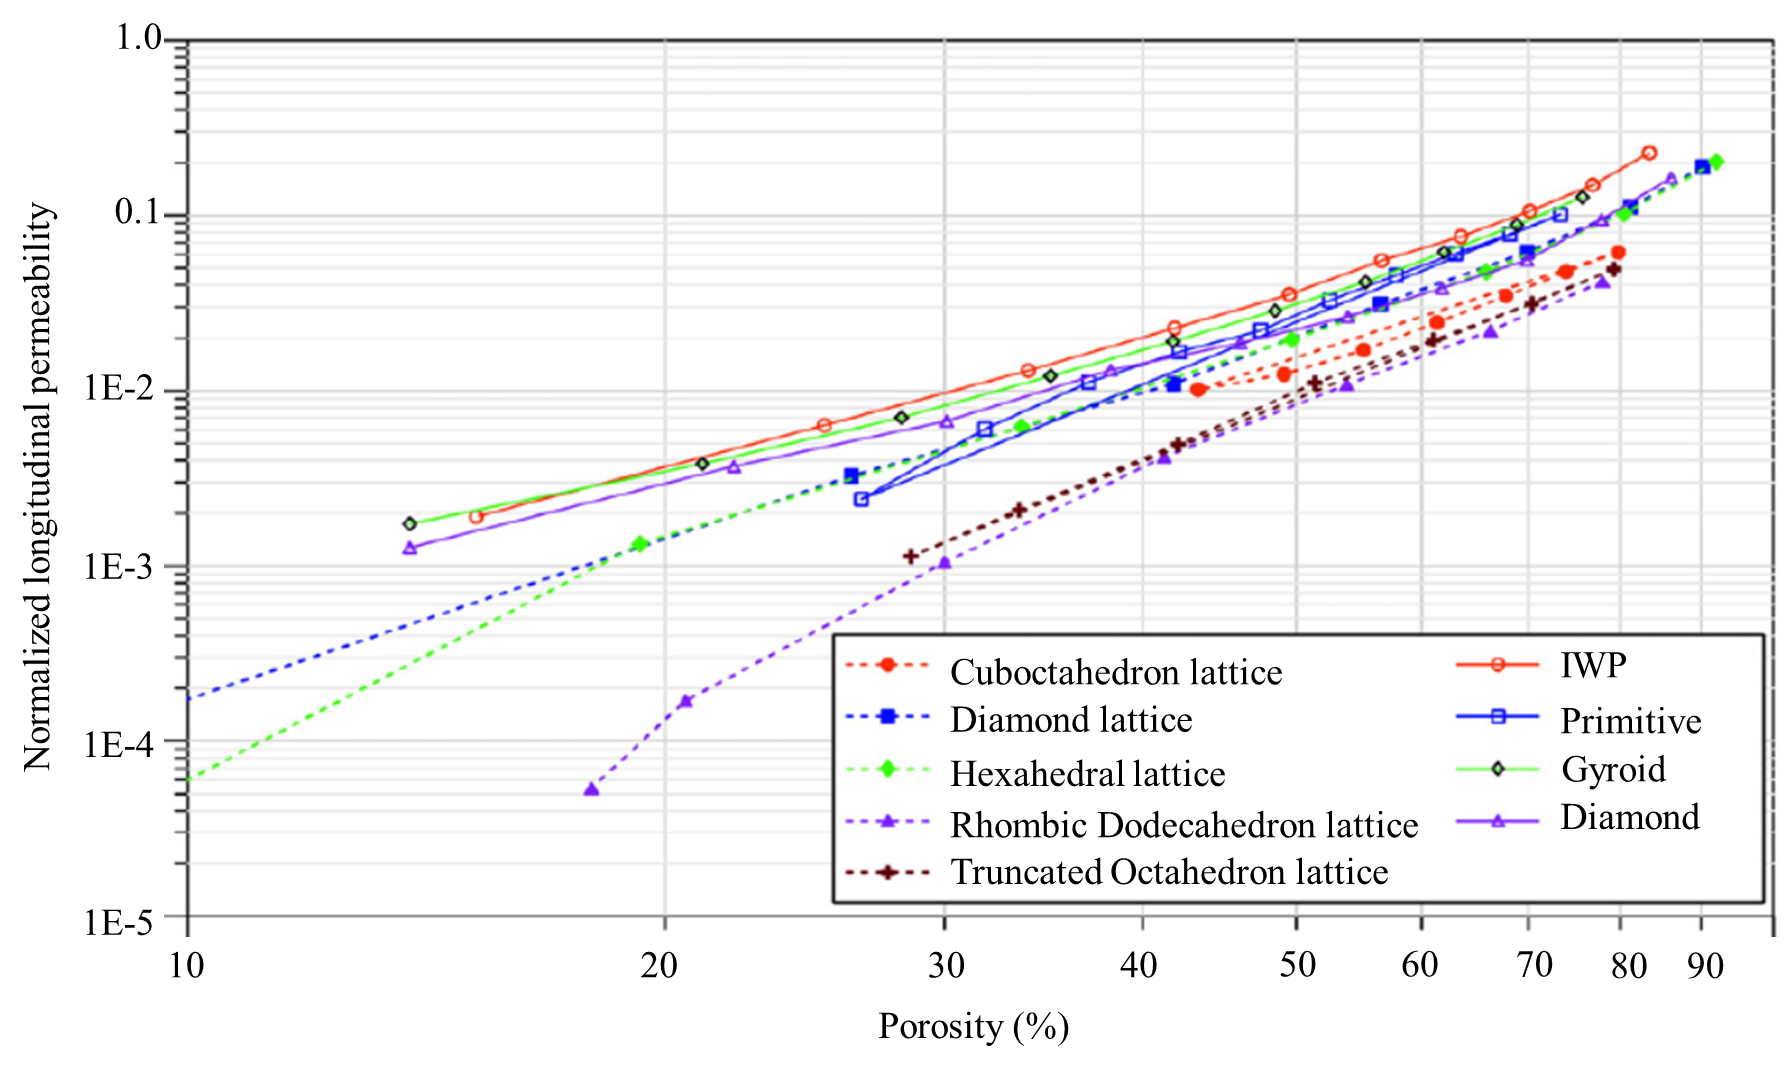 Normalized longitudinal permeability versus porosity for different lattices, adapted from Montazerian et al. [13].